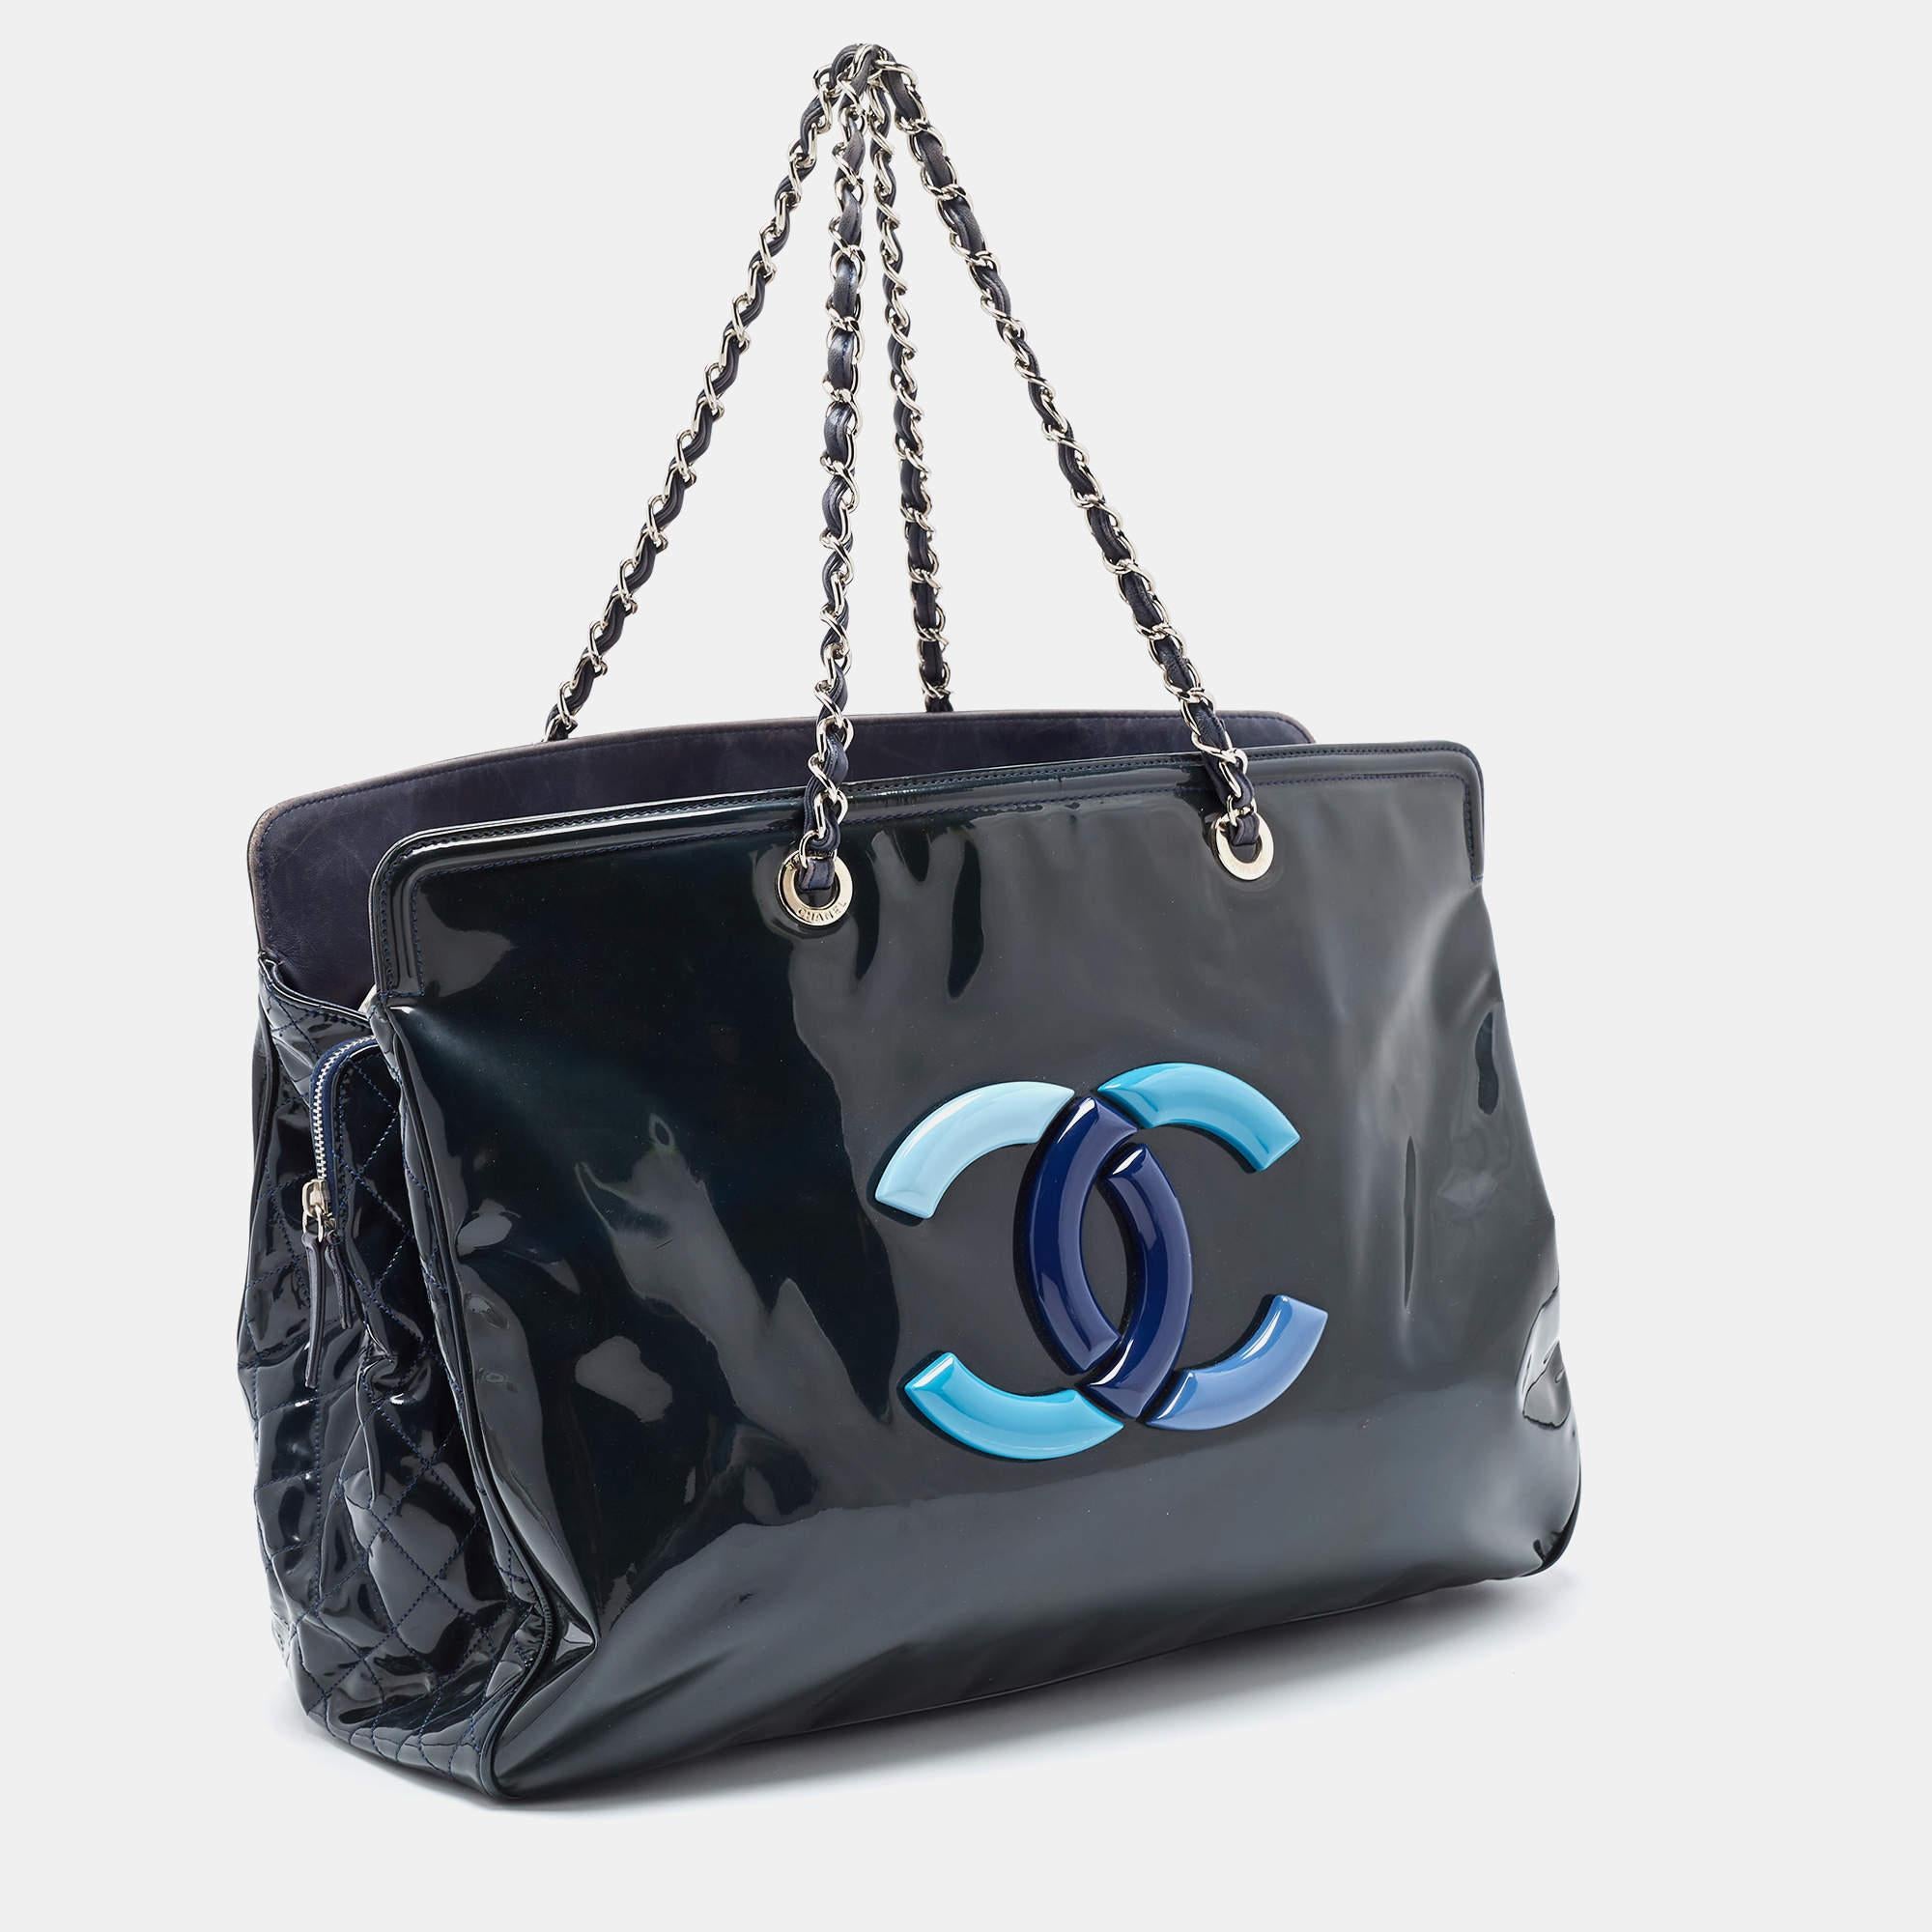 Chanel Teal Patent Leather XL Lipstick Tote 5